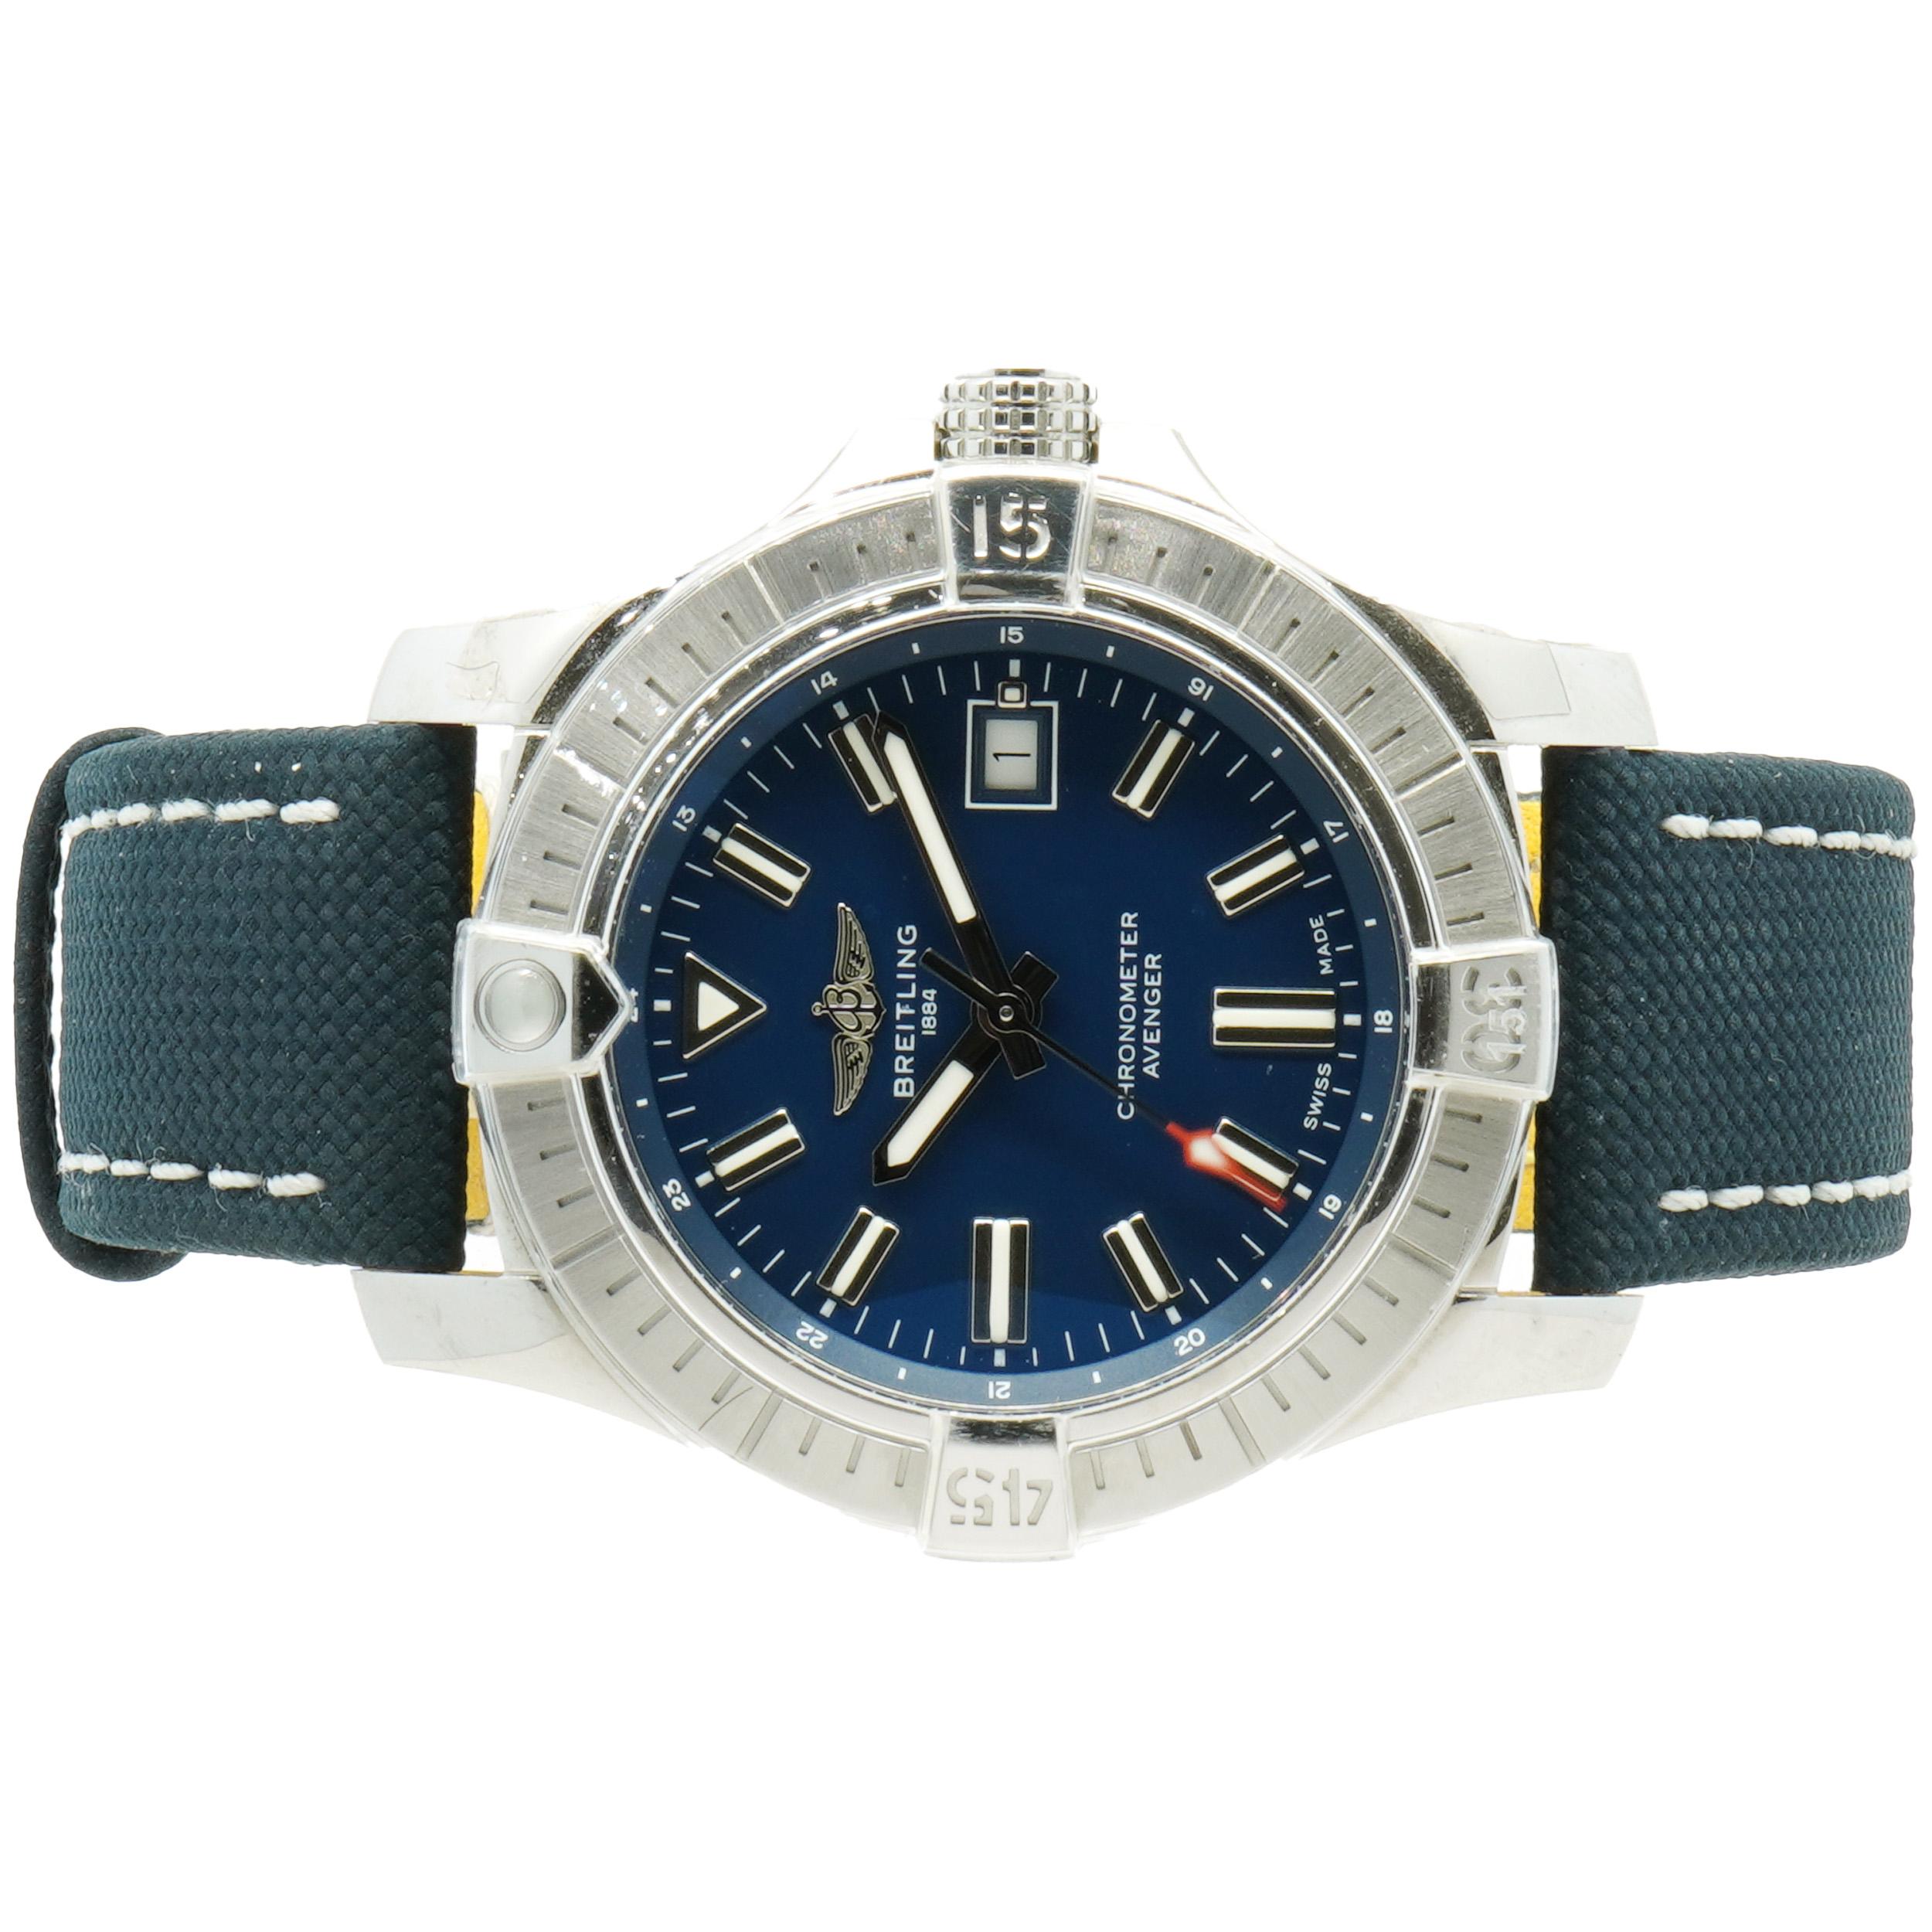 Designer: Breitling
Movement: automatic
Function: hours, minutes, seconds, date
Case: round 43mm stainless steel 
Dial: blue stick
Band: Breitling blue textile strap, buckle
Reference: A17318
Serial #: 7316XXX

Complete with original box and